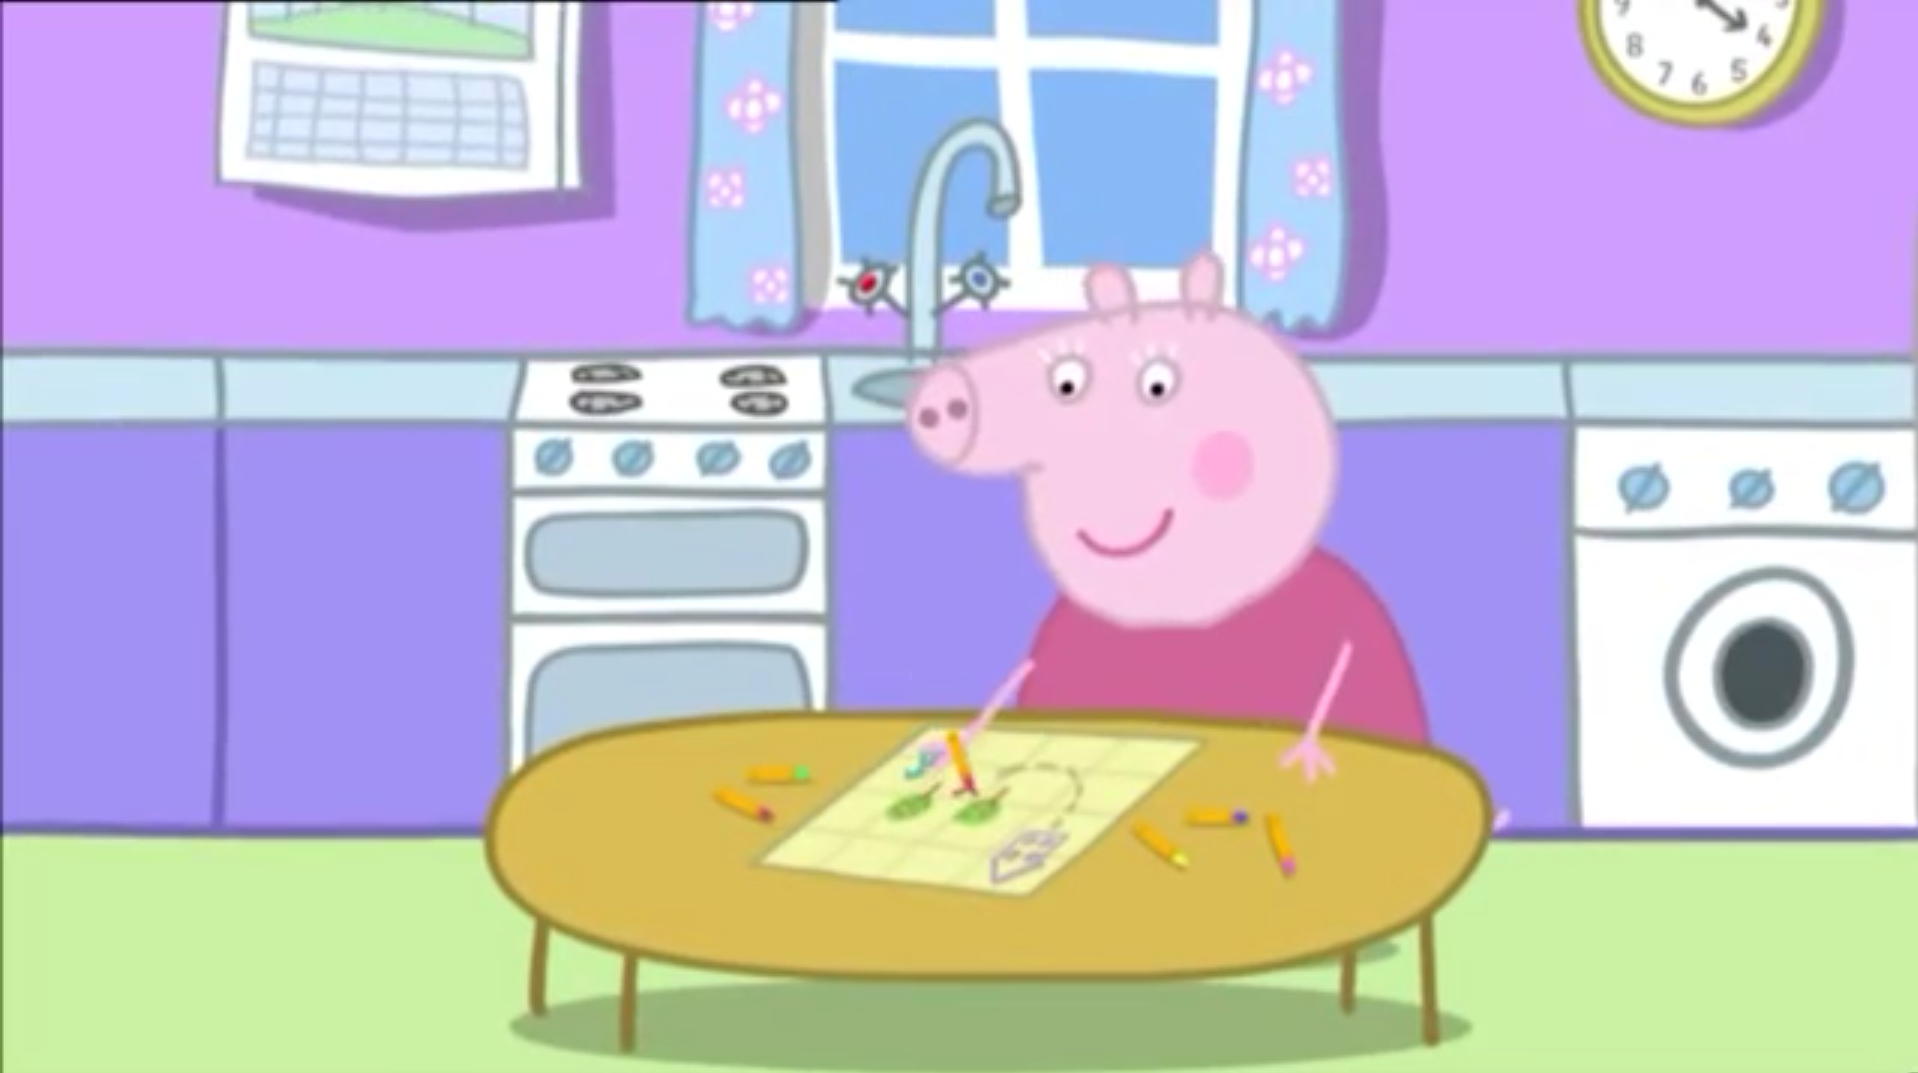 What Treasure Did Peppa Pig Find? 🍄 Earth Day Special 